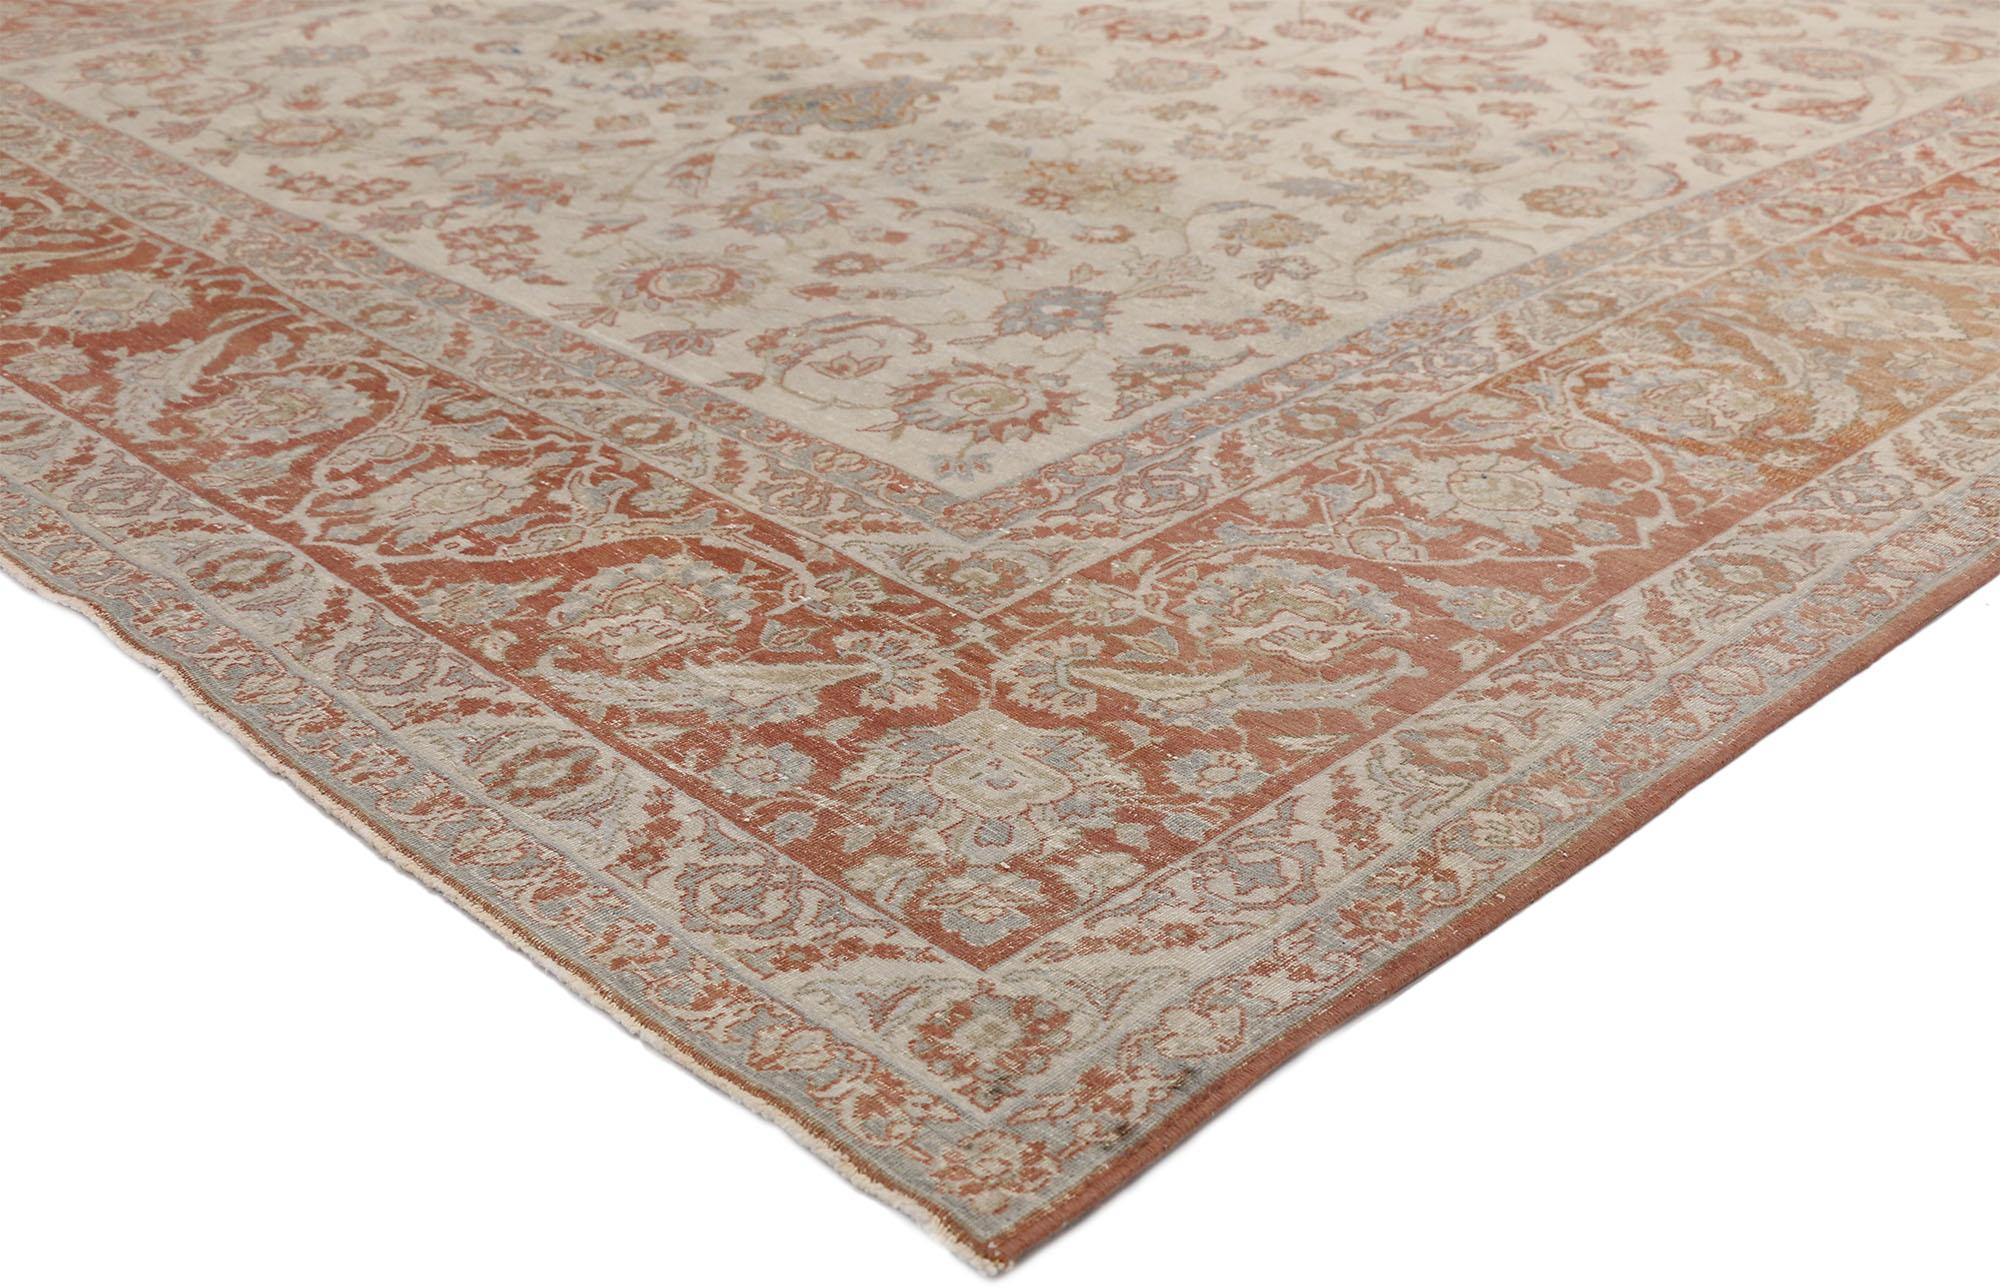 52435 Rustic Antique Persian Isfahan Rug, 08'00 x 12'02.
Rustic sensibility meets understated elegance in this hand knotted wool distressed antique Persian Isfahan rug. The lovingly time-worn composition features an all-over Herati pattern of muted